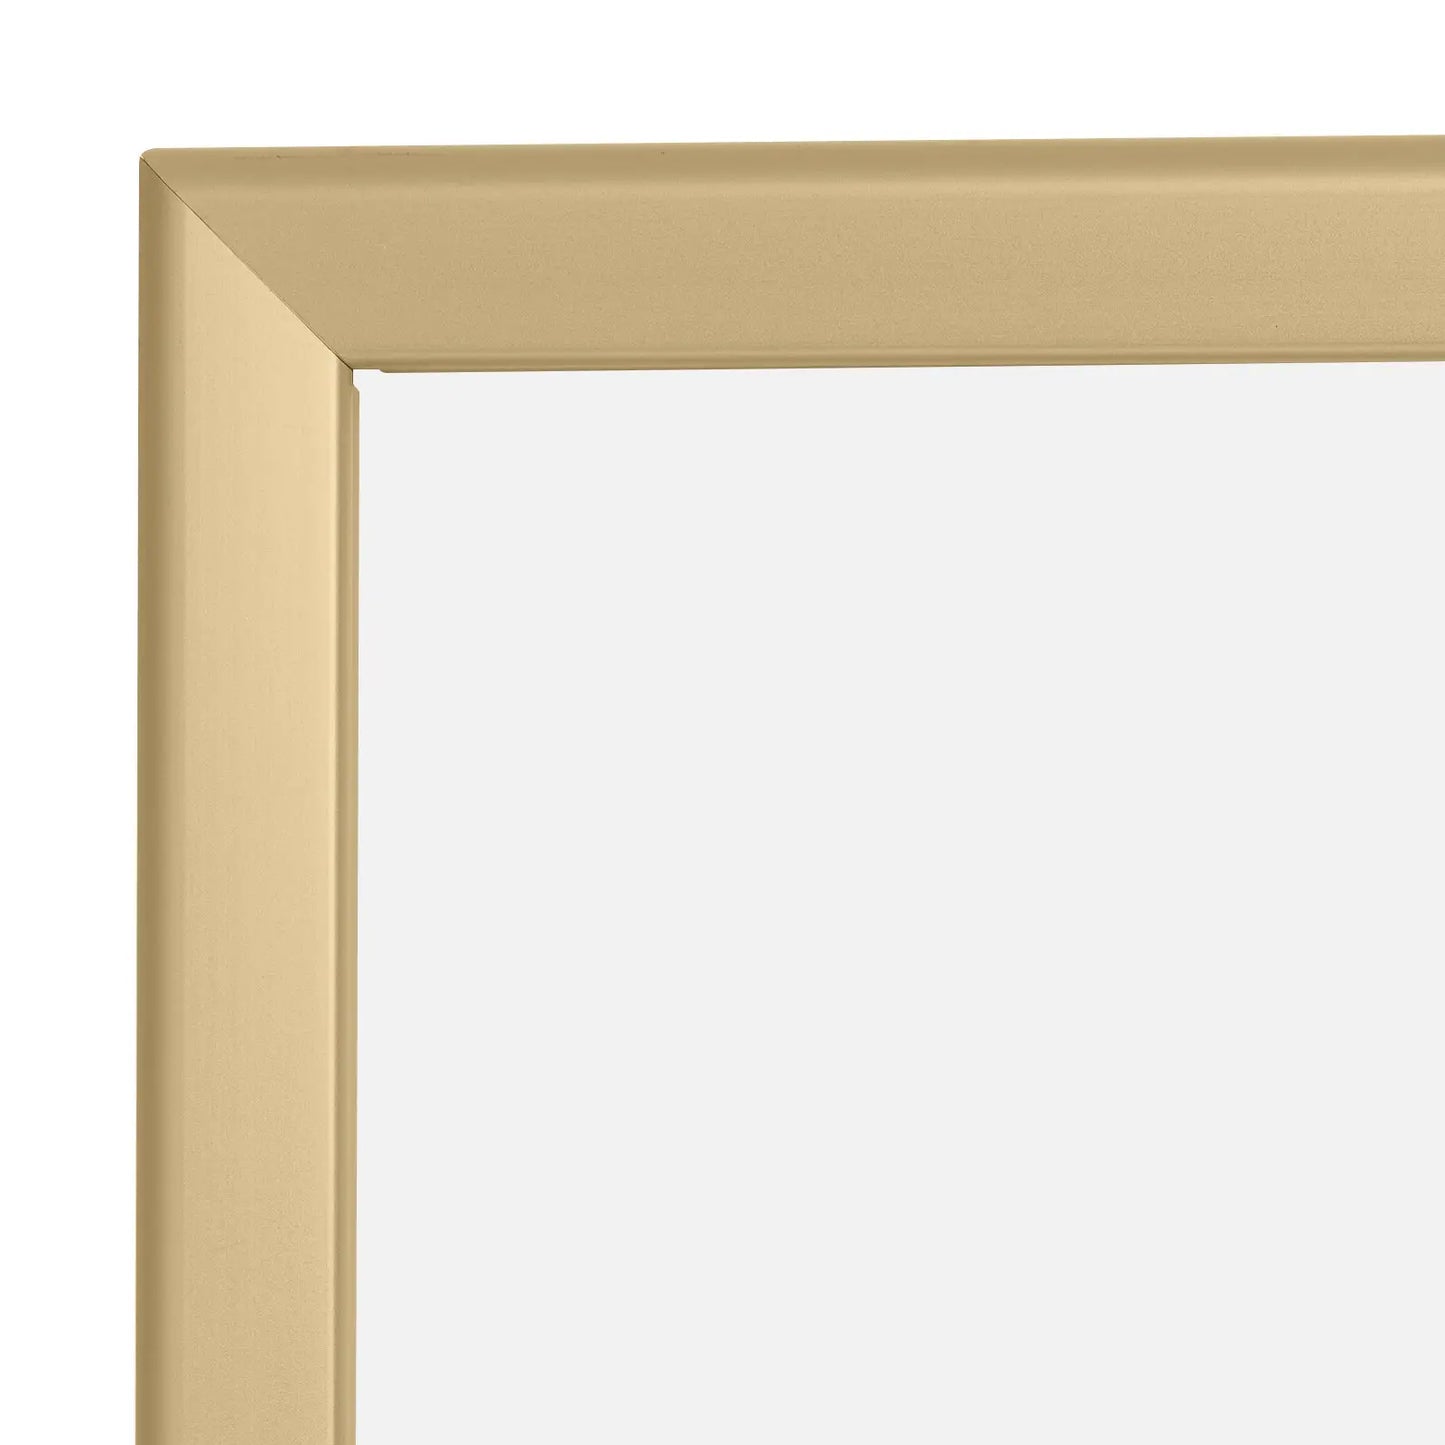 24x30 Gold SnapeZo® Snap Frame - 1.25" Profile - Snap Frames Direct